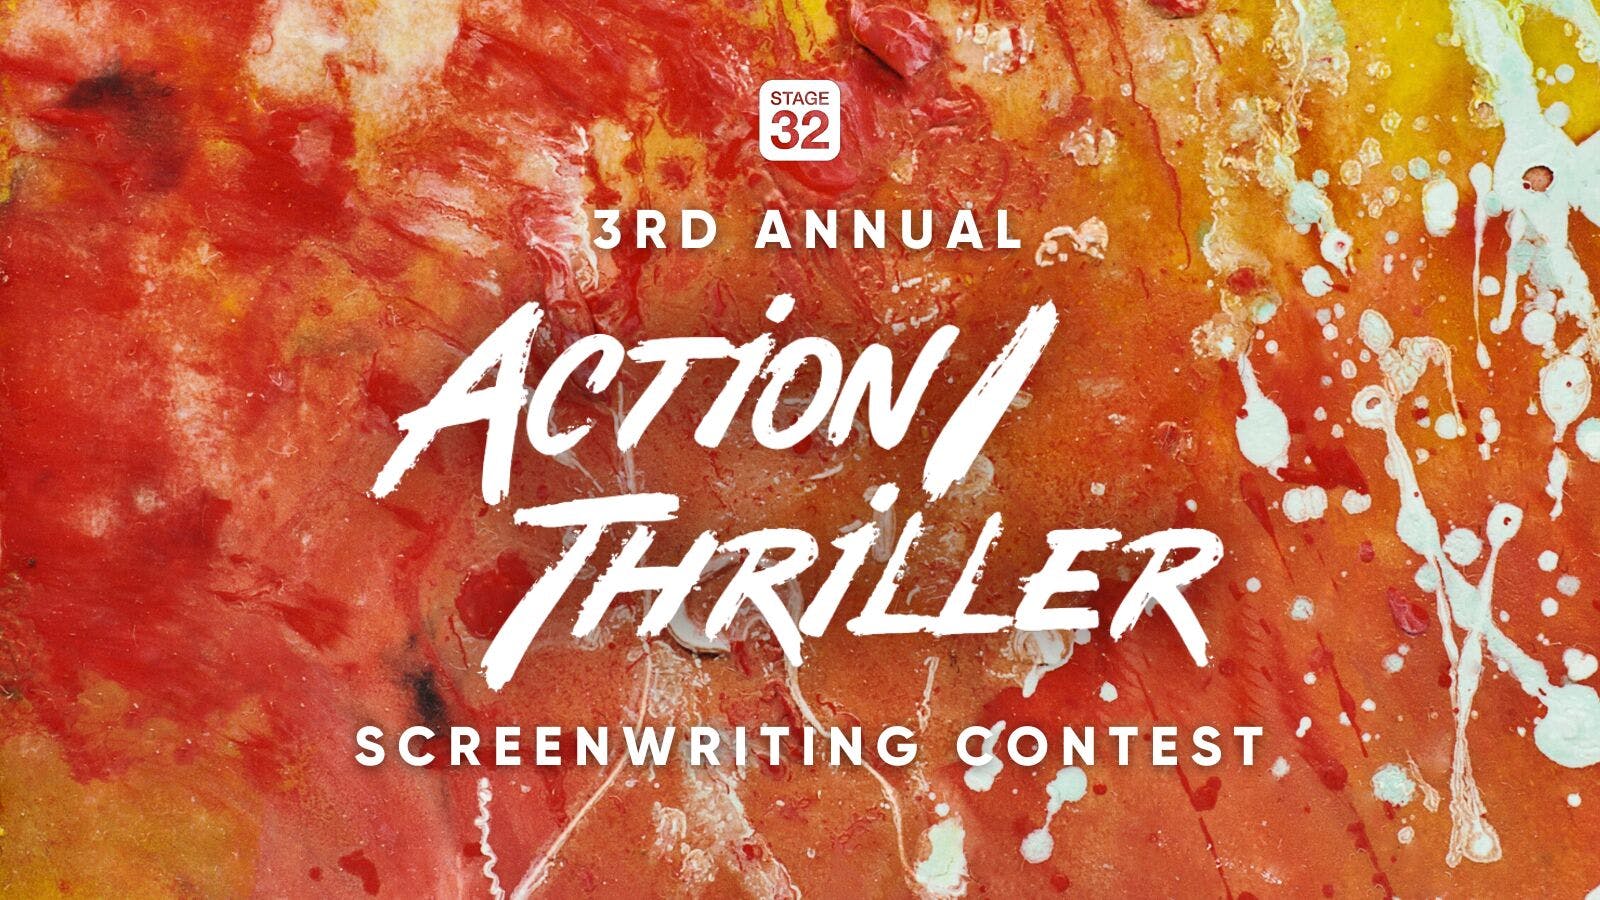 Announcing The 3rd Annual Action/Thriller Screenwriting Contest